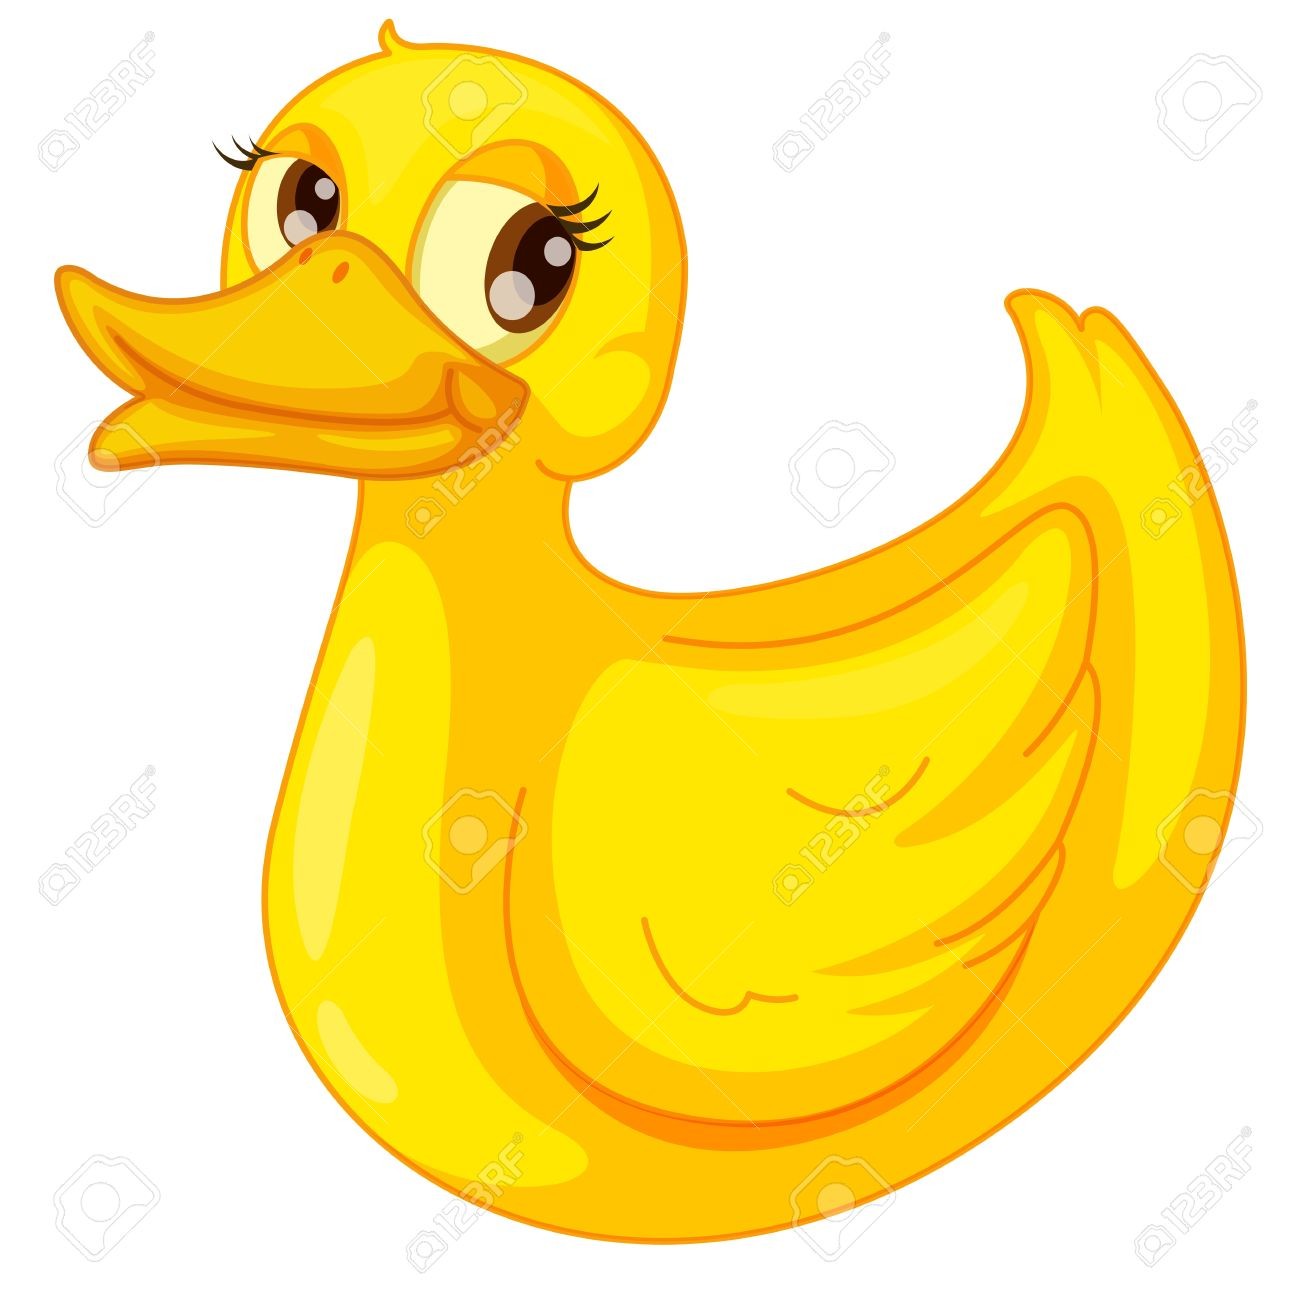 2 21471 White Duck Cartoon Png Clip Art Image Clipart With.